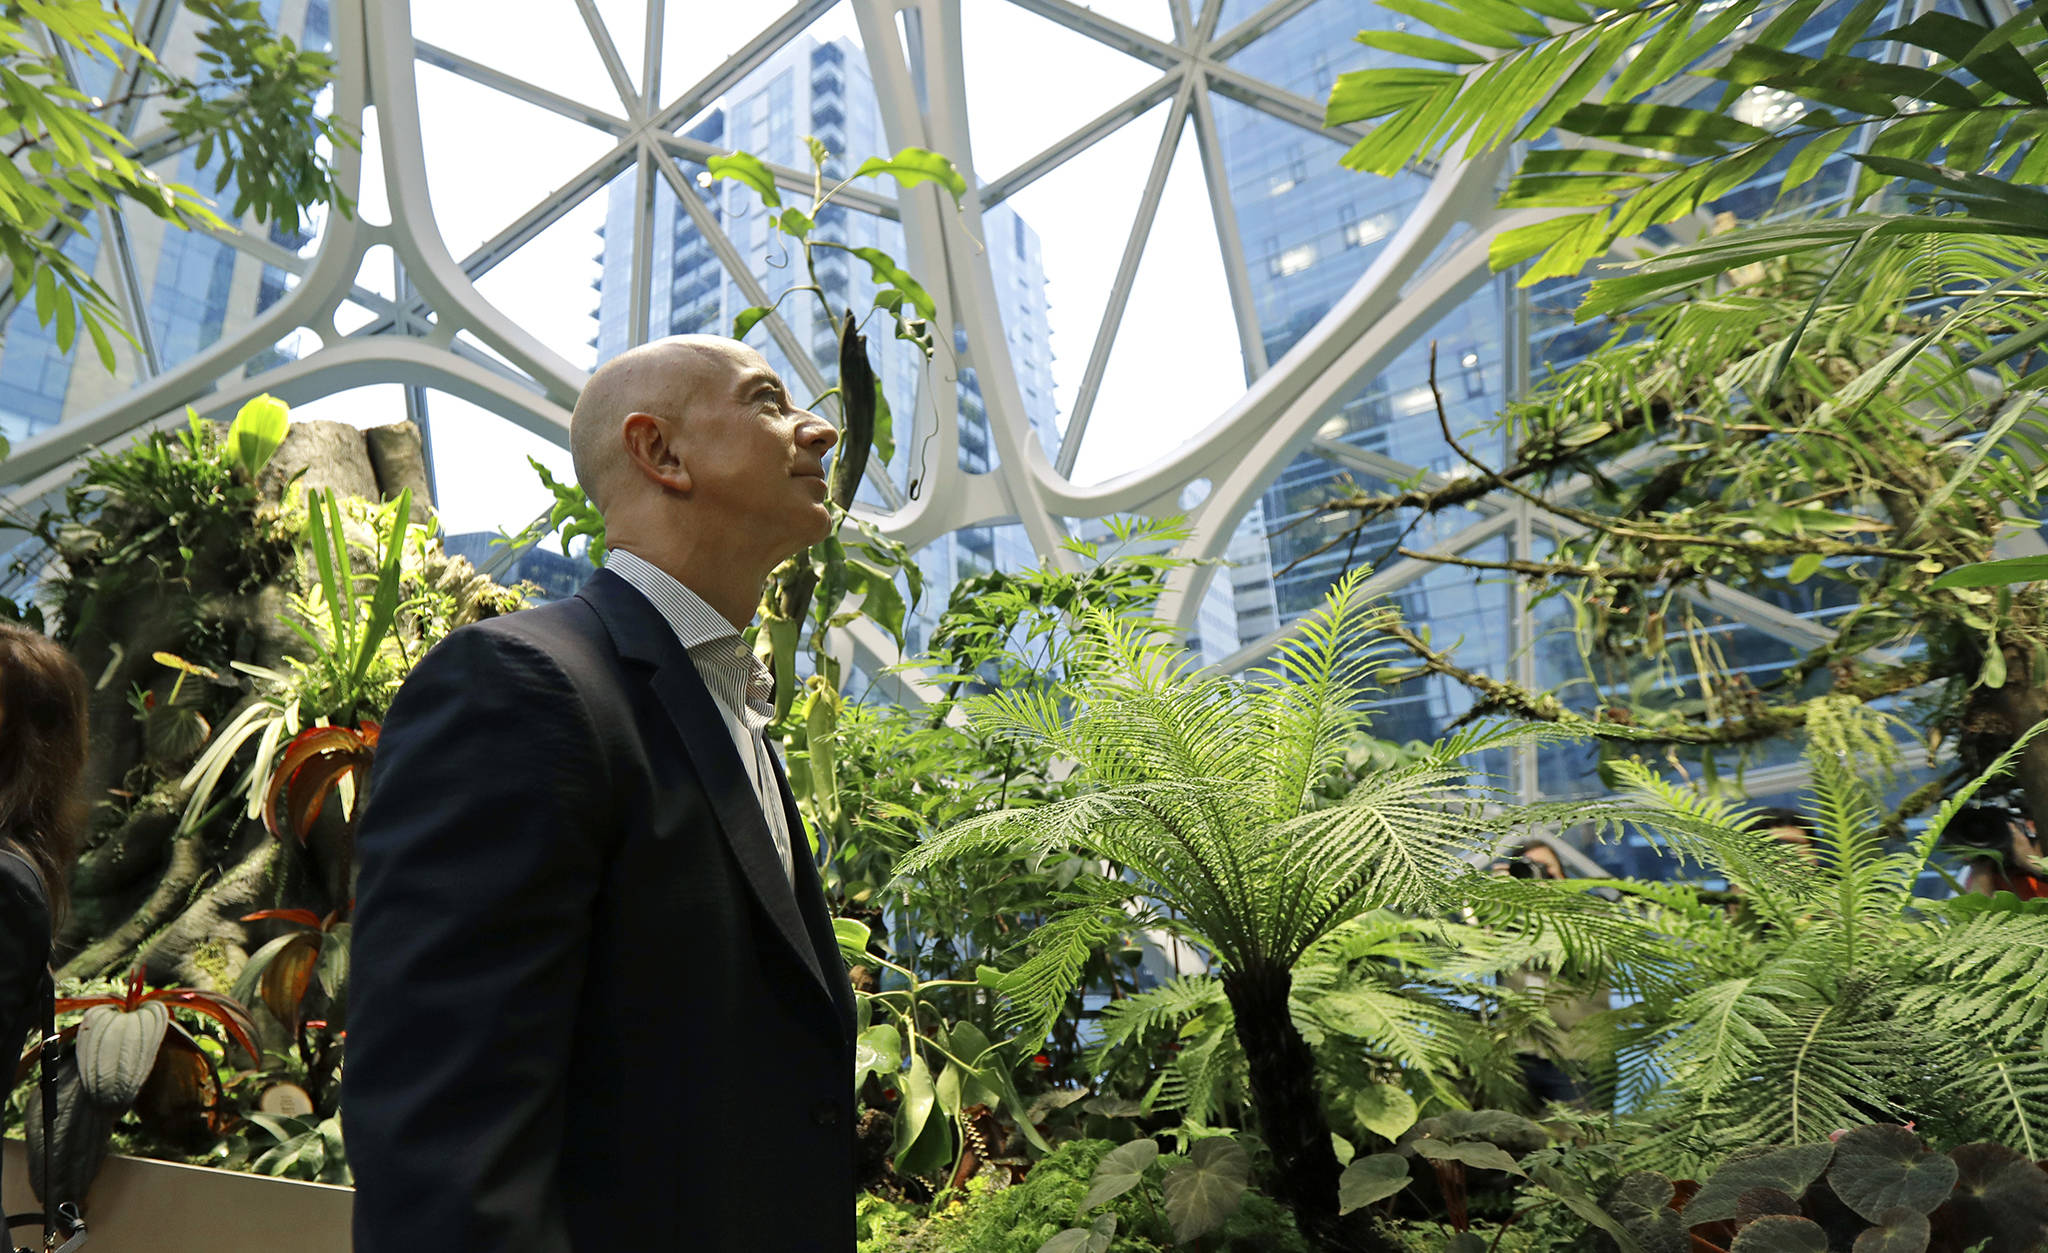 Jeff Bezos, the CEO and founder of Amazon.com, takes a walking tour of the Amazon Spheres, three plant-filed geodesic domes that serve as a work- and gathering place for Amazon employees, following a grand opening ceremony, Monday in Seattle. (AP Photo/Ted S. Warren)